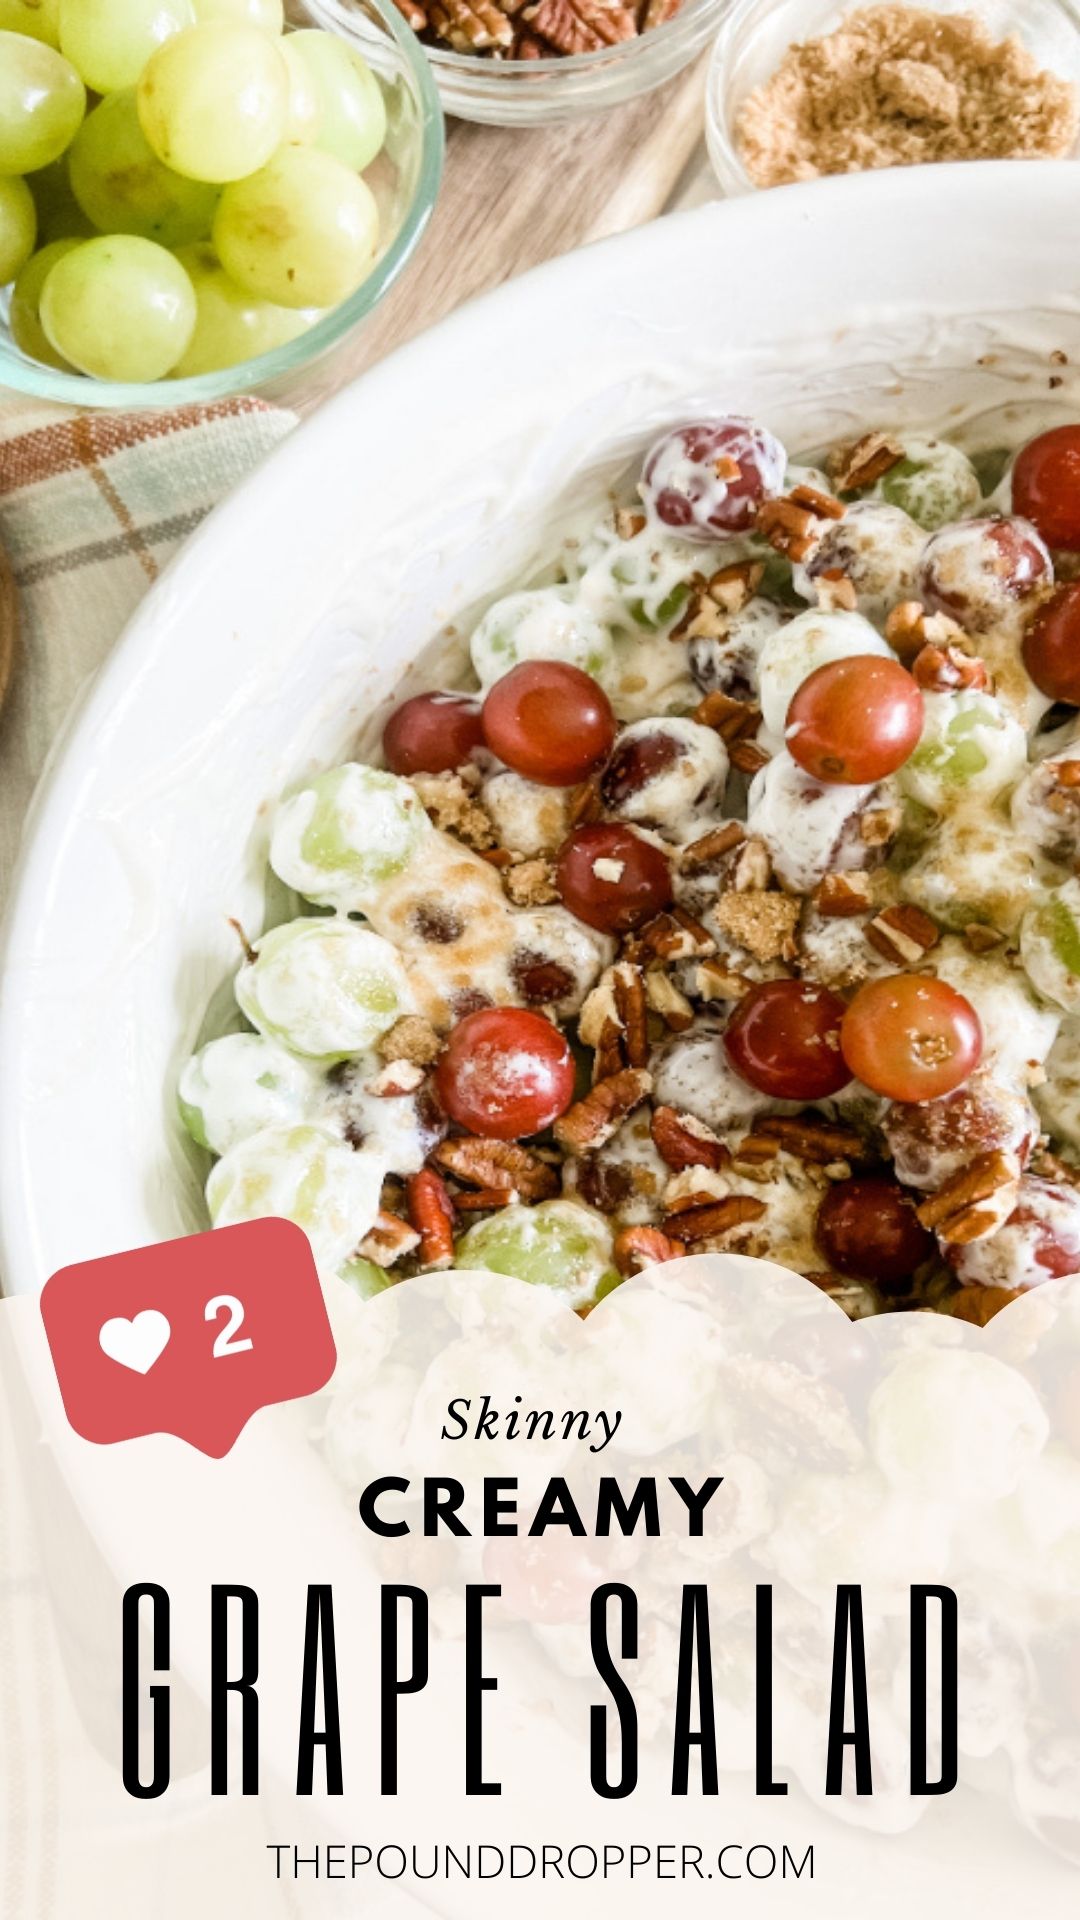 This Skinny Creamy Grape Salad is a tasty dessert salad- and summertime favorite at our house! A combination of bright green and red grapes slathered in a creamy lightened up cream cheese dressing and then topped with brown sugar and crunchy pecans. It's a crowd pleaser and great for potlucks!  via @pounddropper